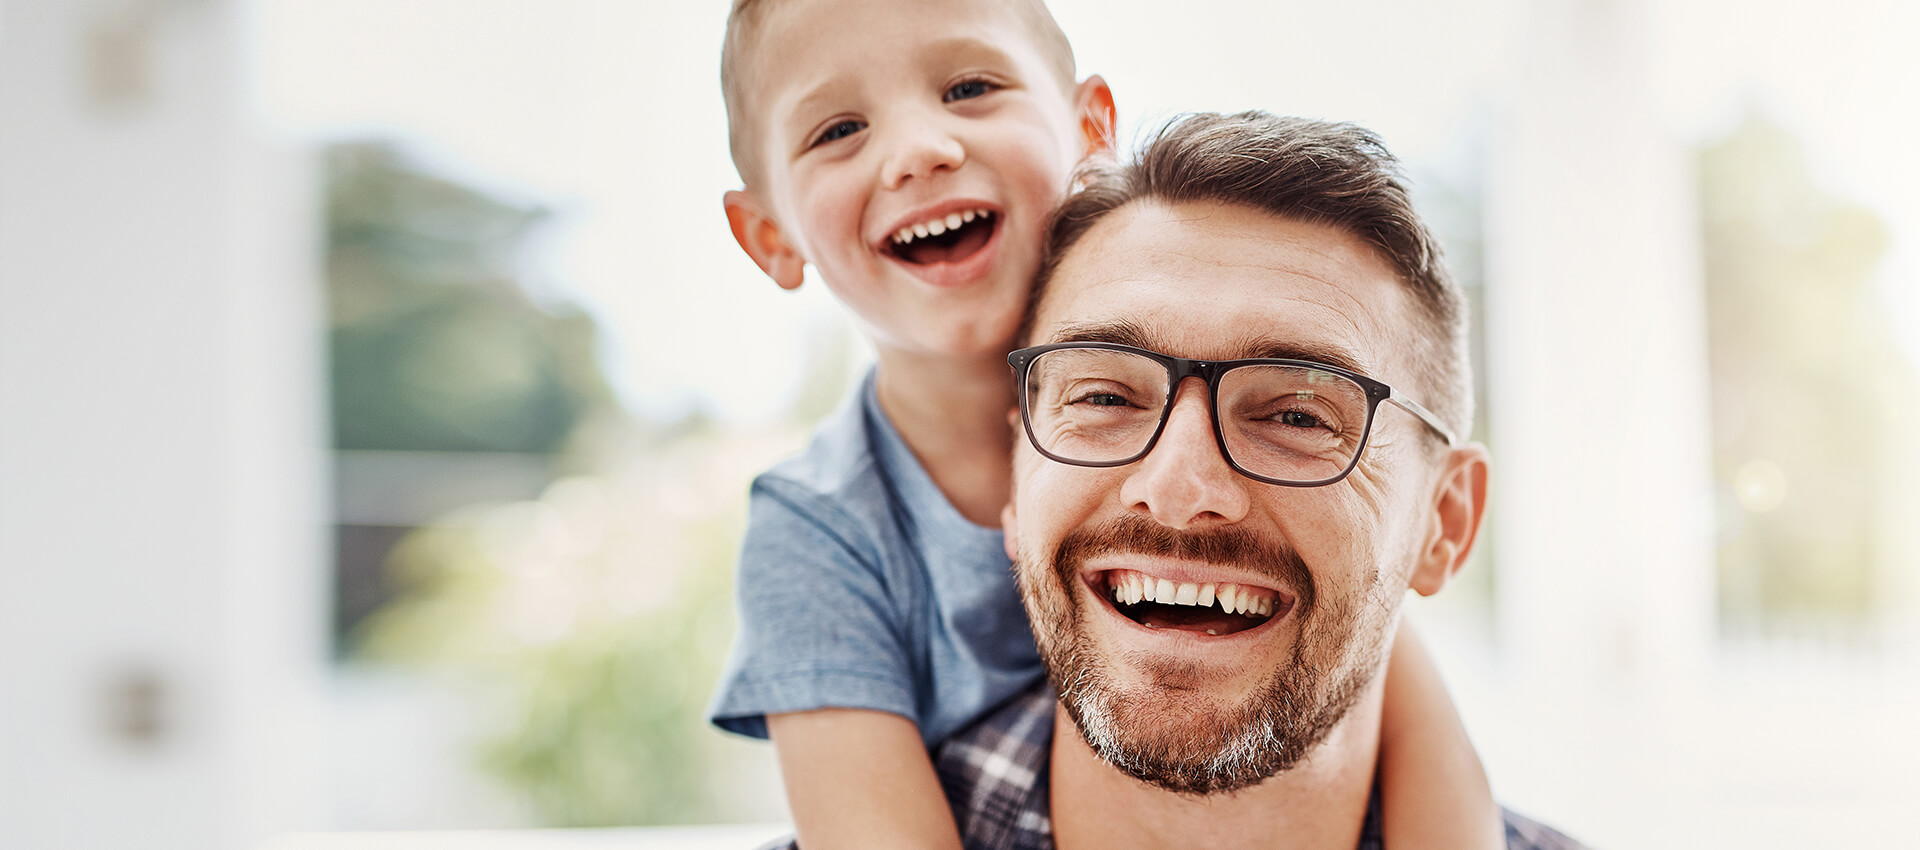 smiling-man-with-son